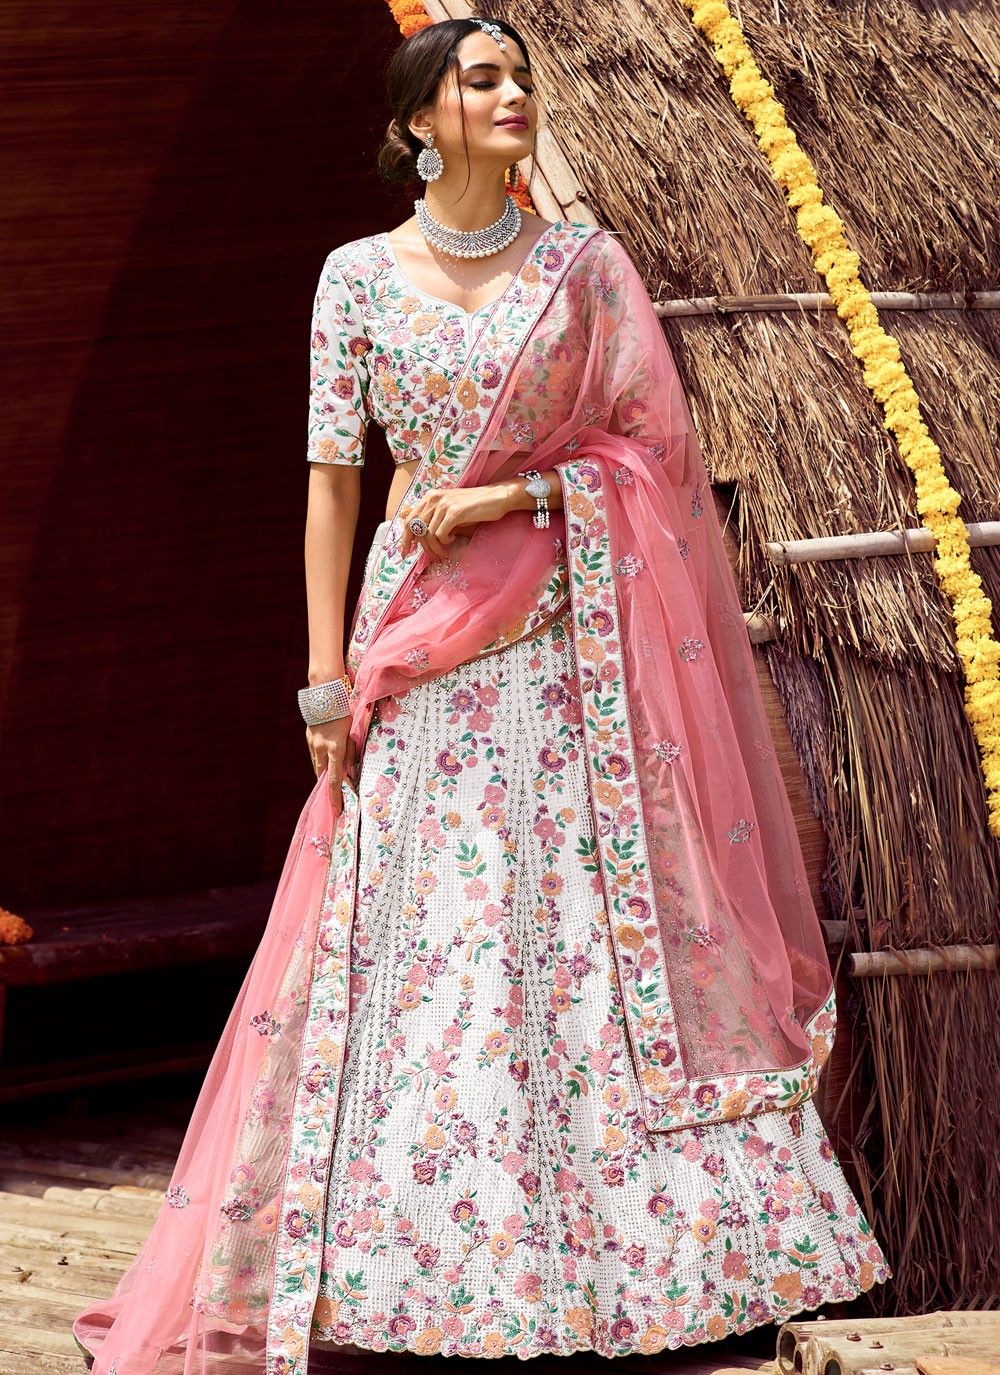 Sequins Satin Lehenga Choli in Off White and Pink